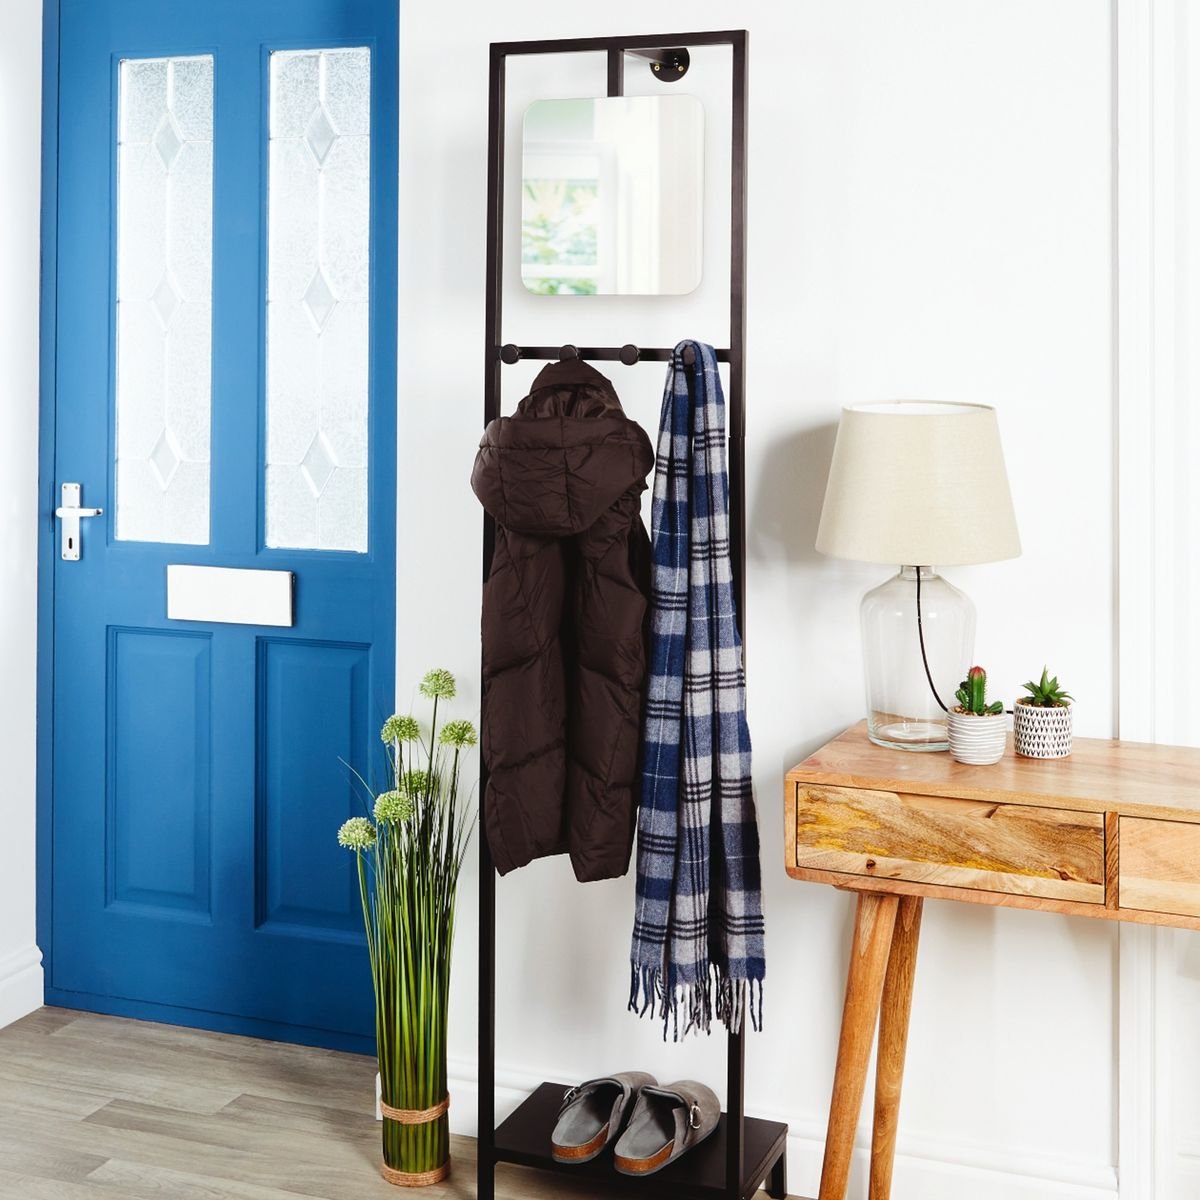 Aldi is selling this hallway storage must-have for £140 less than one at Wayfair